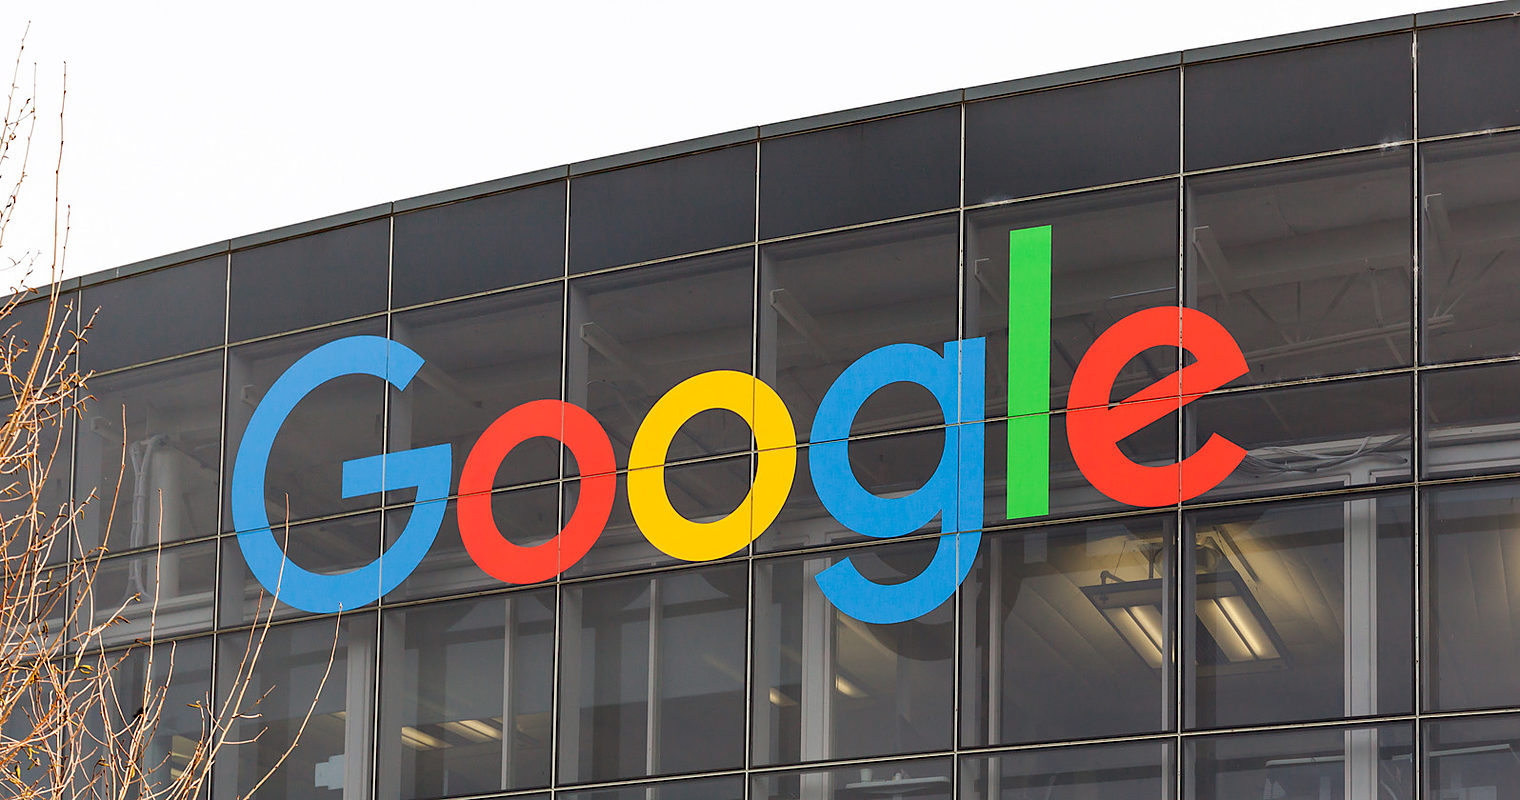 Will Australia Have to Live Without Google Search?